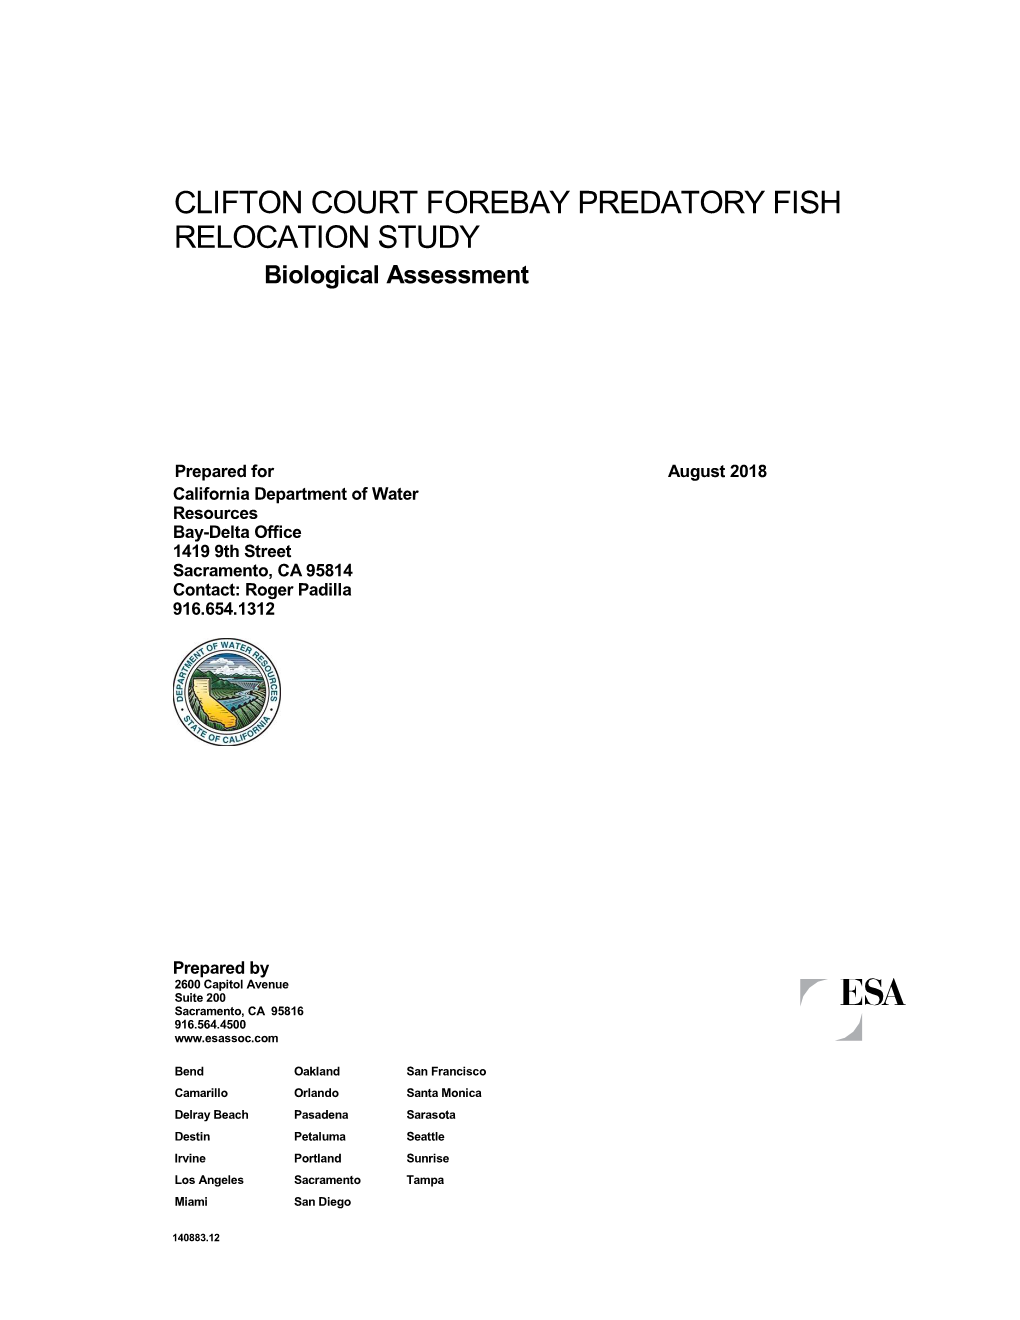 CLIFTON COURT FOREBAY PREDATORY FISH RELOCATION STUDY Biological Assessment